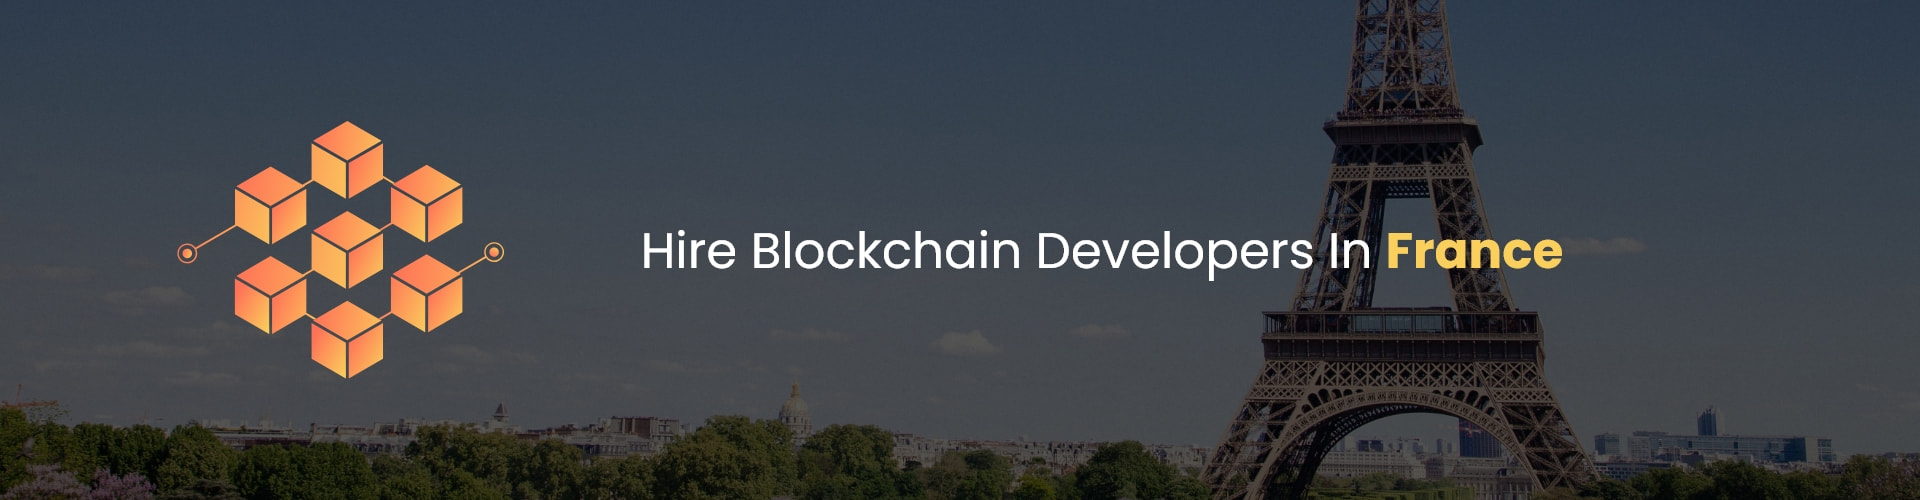 hire blockchain developers in france